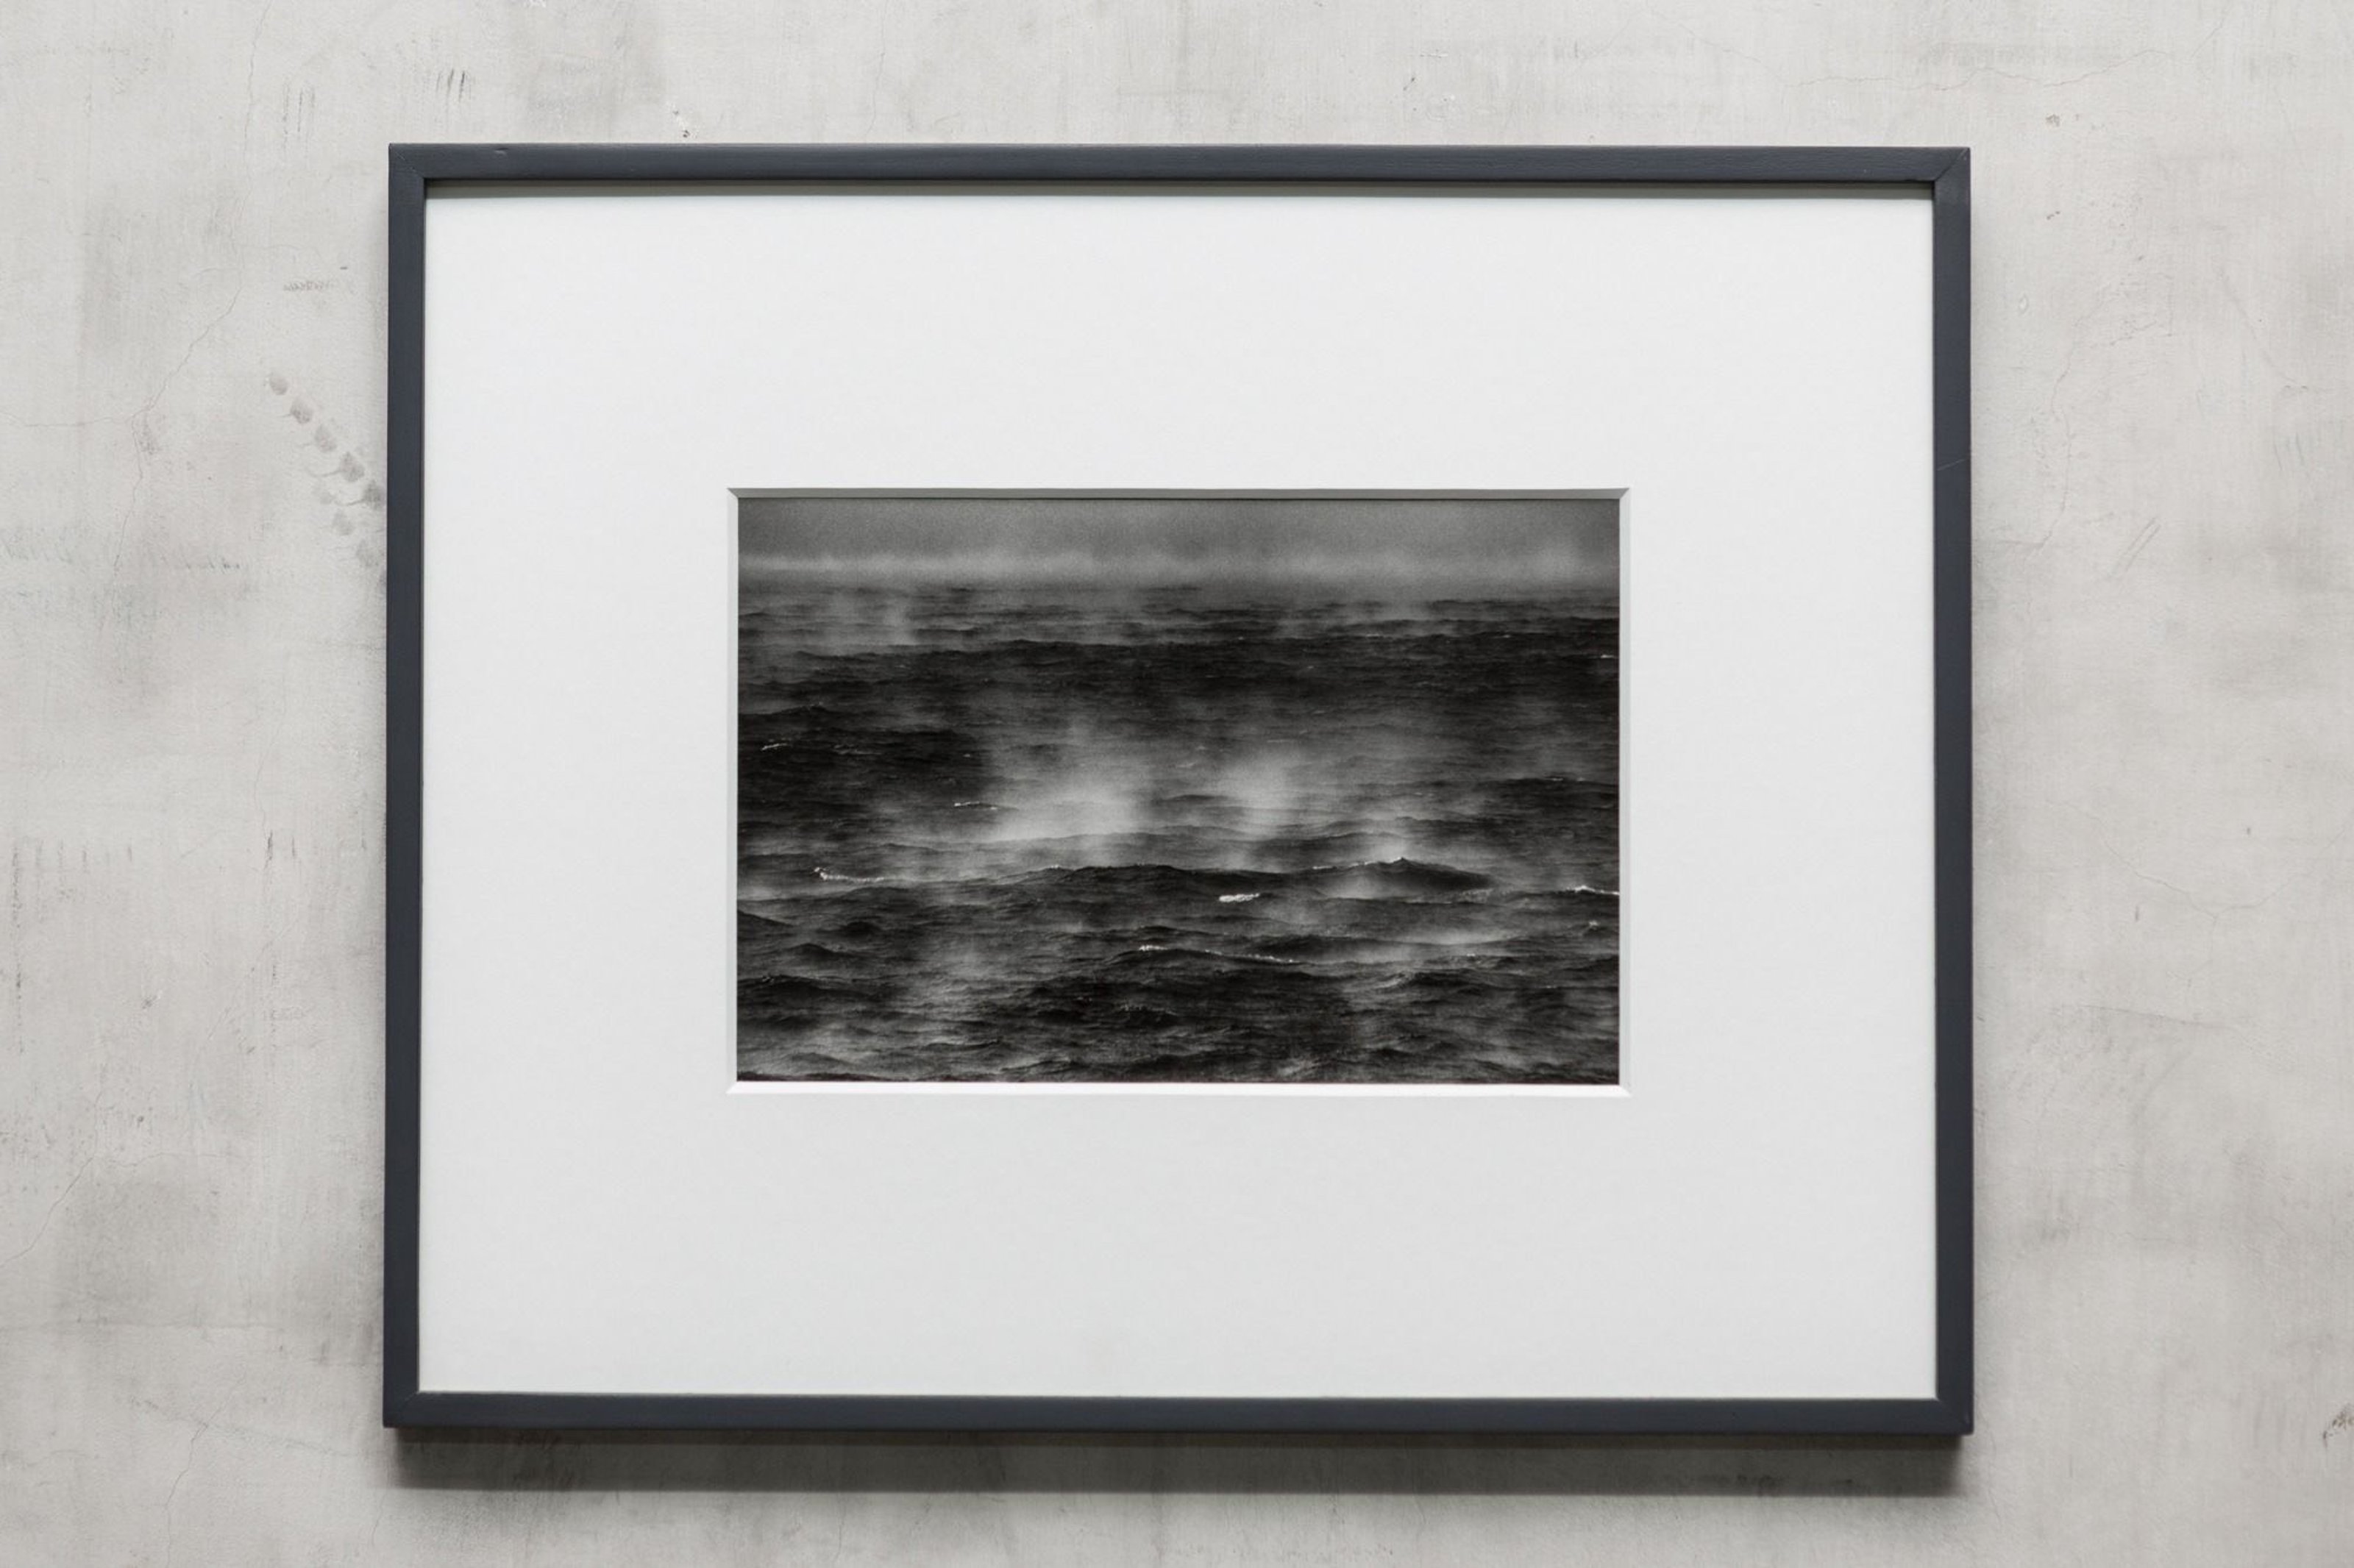 Framed black and white photograph of the sea and sky at storm